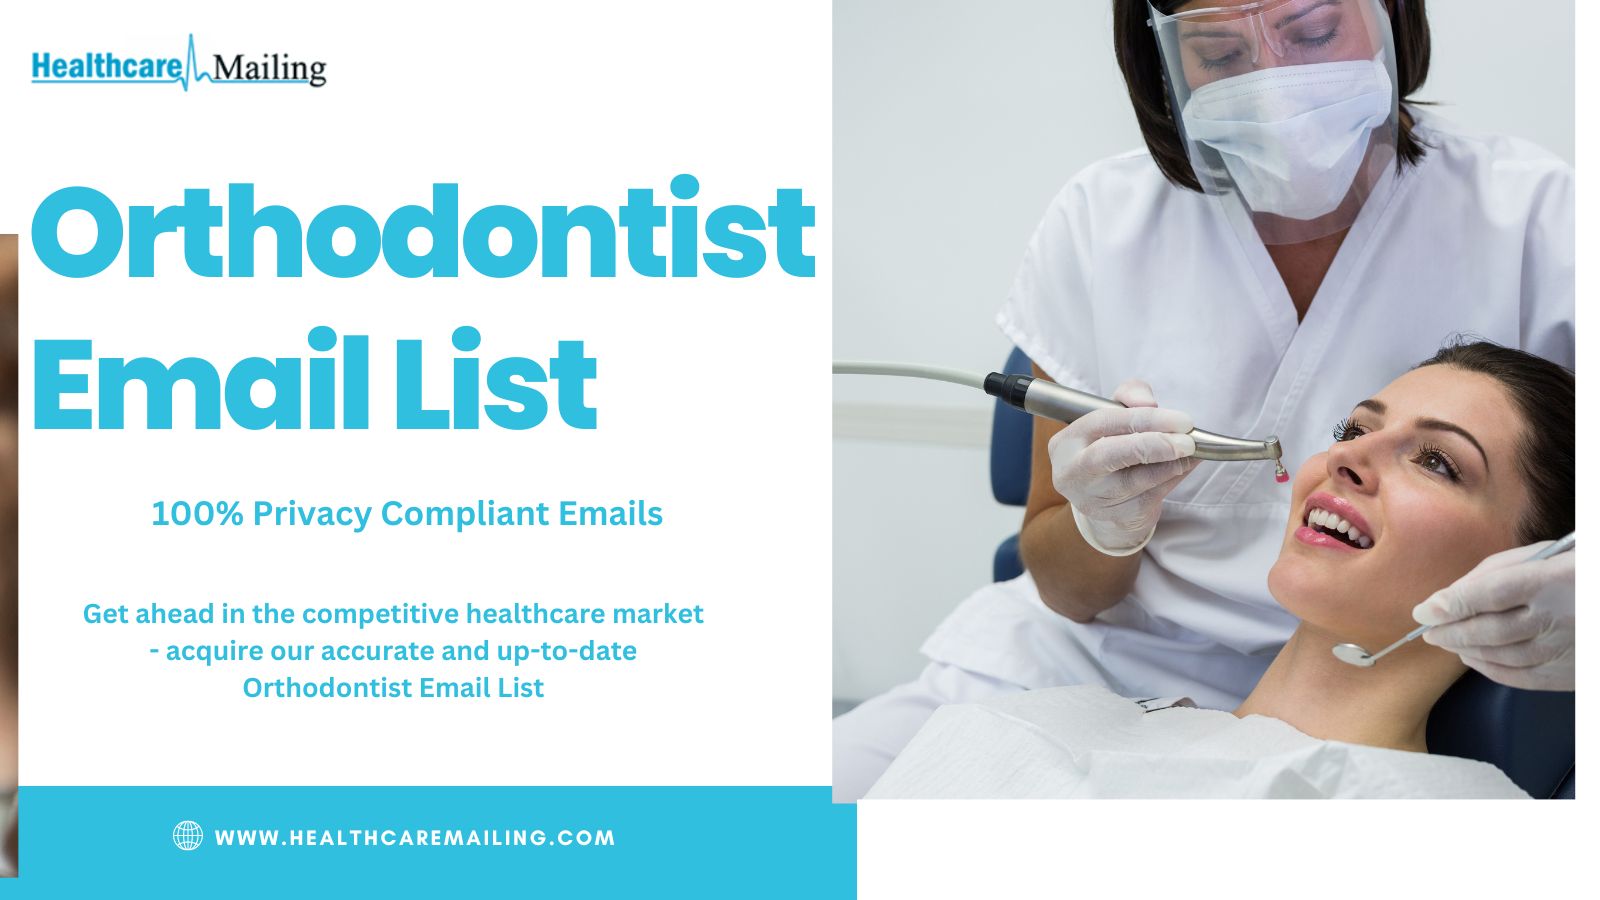 Trends to Watch: B2B Healthcare Marketing – Orthodontist Email List in a Post-Pandemic World